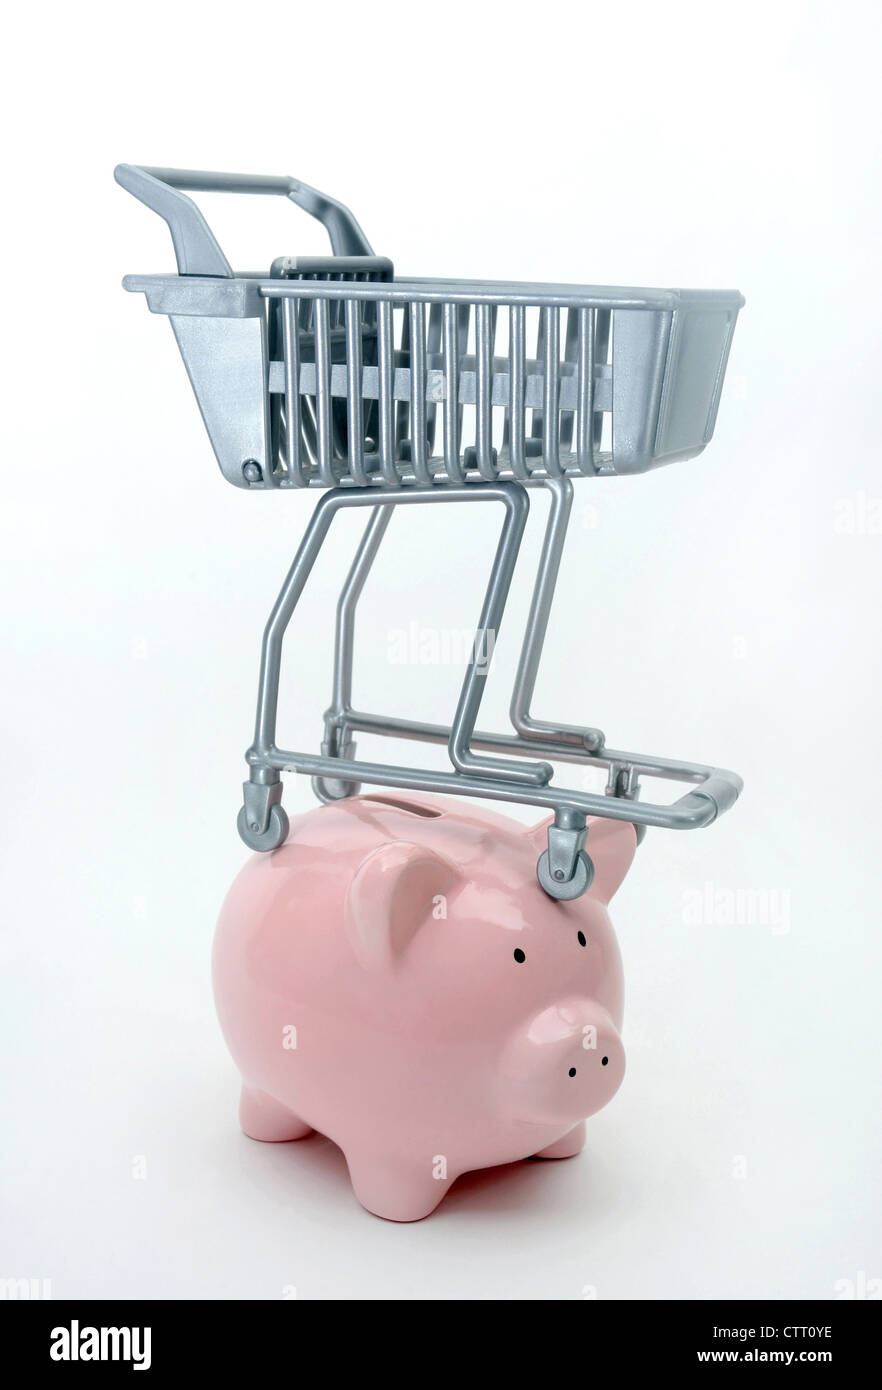 SUPERMARKET SHOPPING TROLLEY BALANCING ON PIGGYBANK RE INCOMES FOOD PRICES INCOMES HOUSEHOLD BUDGETS RISES COST OF LIVING ETC UK Stock Photo